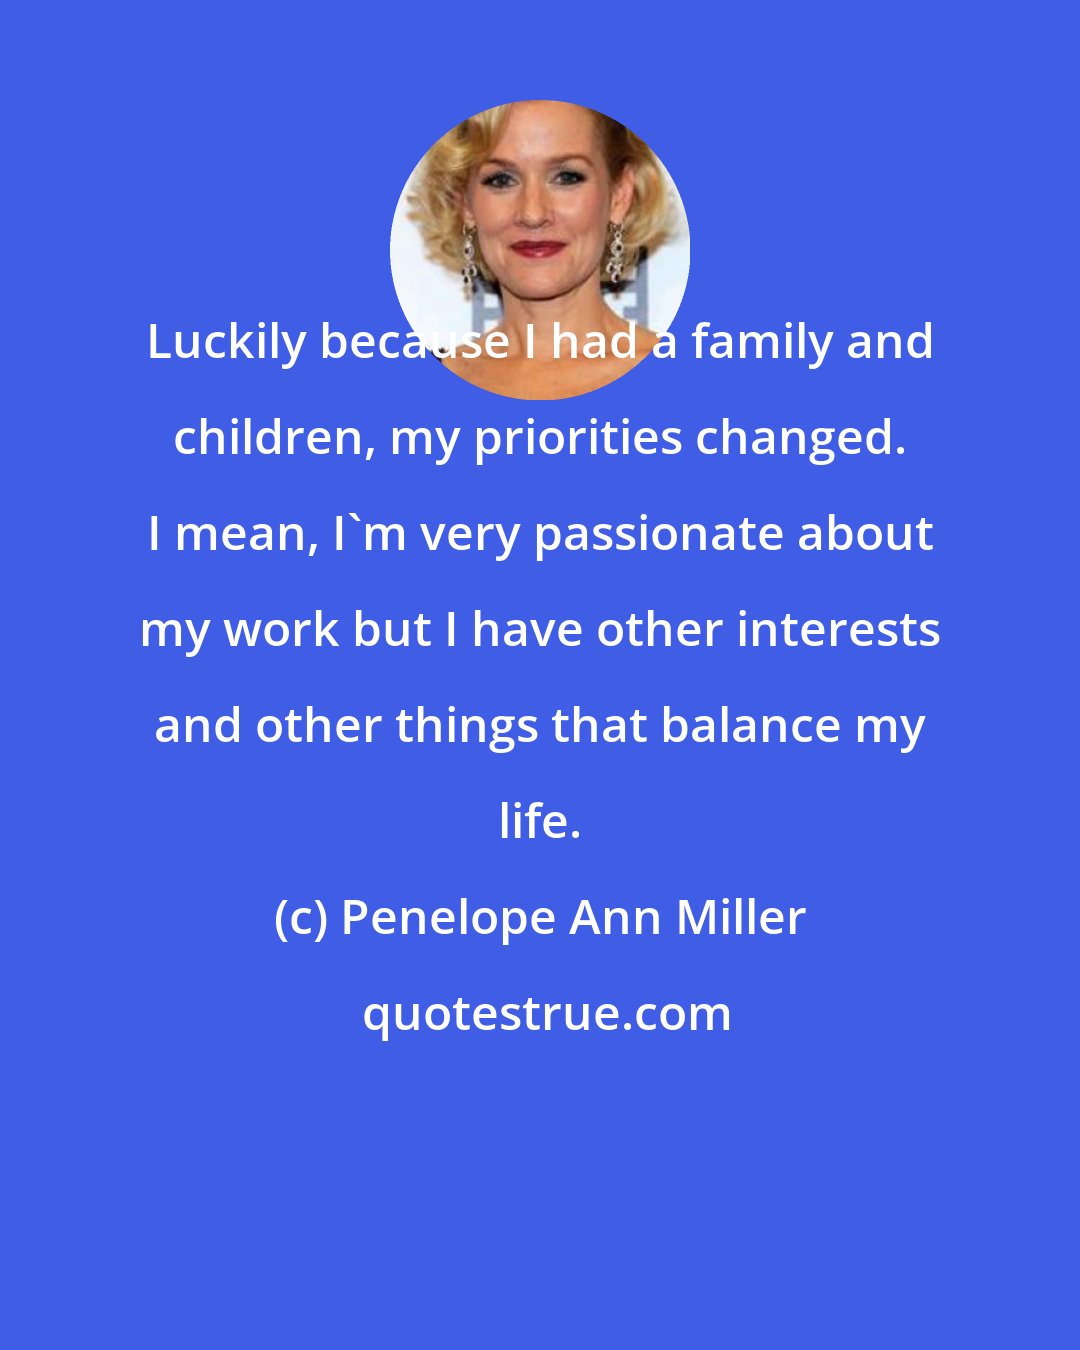 Penelope Ann Miller: Luckily because I had a family and children, my priorities changed. I mean, I'm very passionate about my work but I have other interests and other things that balance my life.